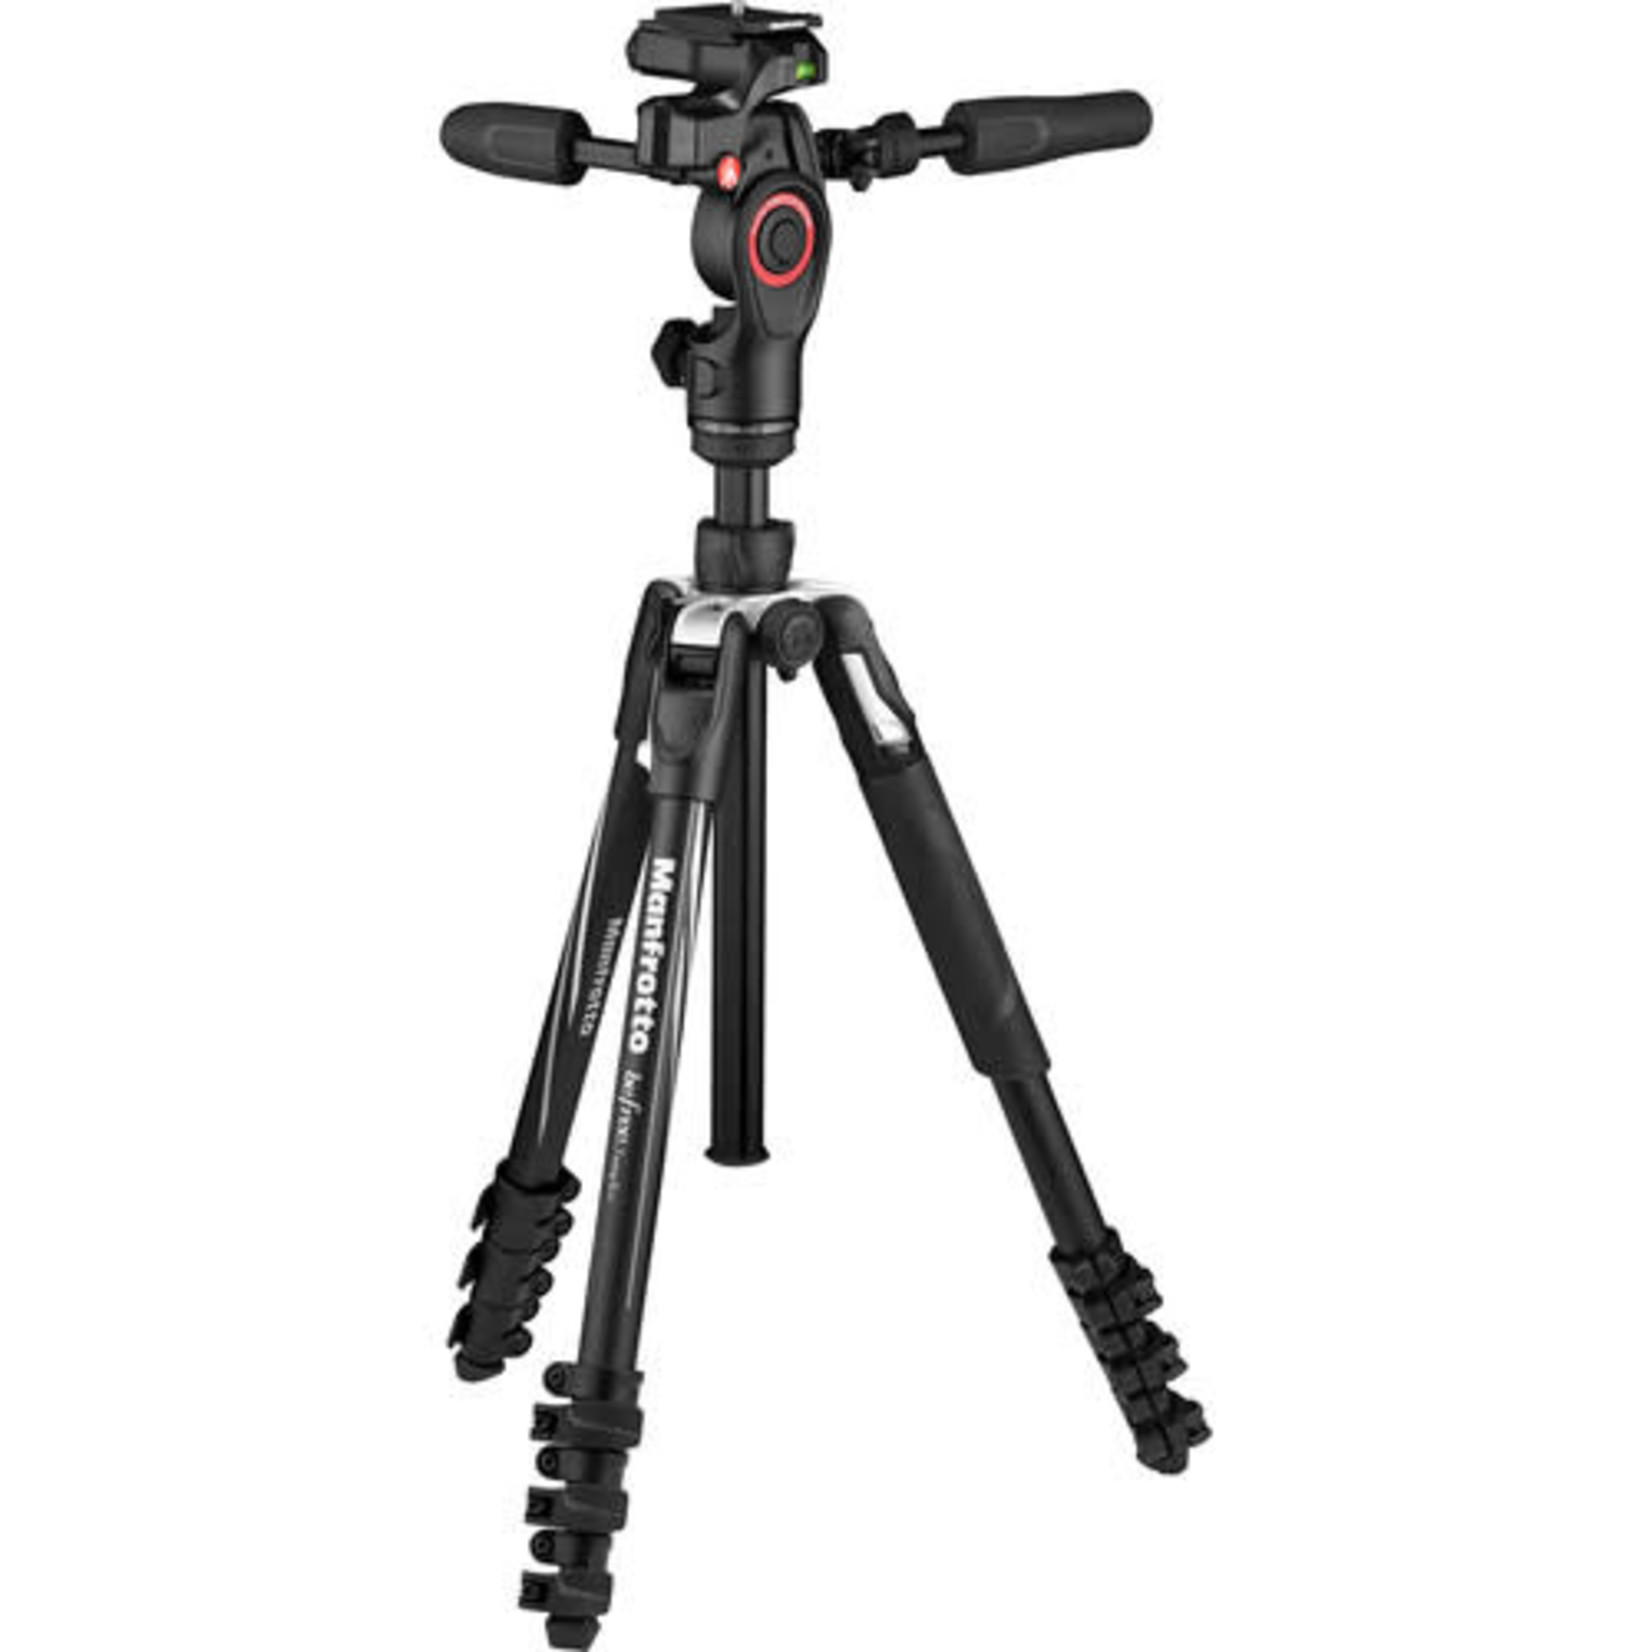 Manfrotto Manfrotto Befree 3-Way Live Advanced Tripod